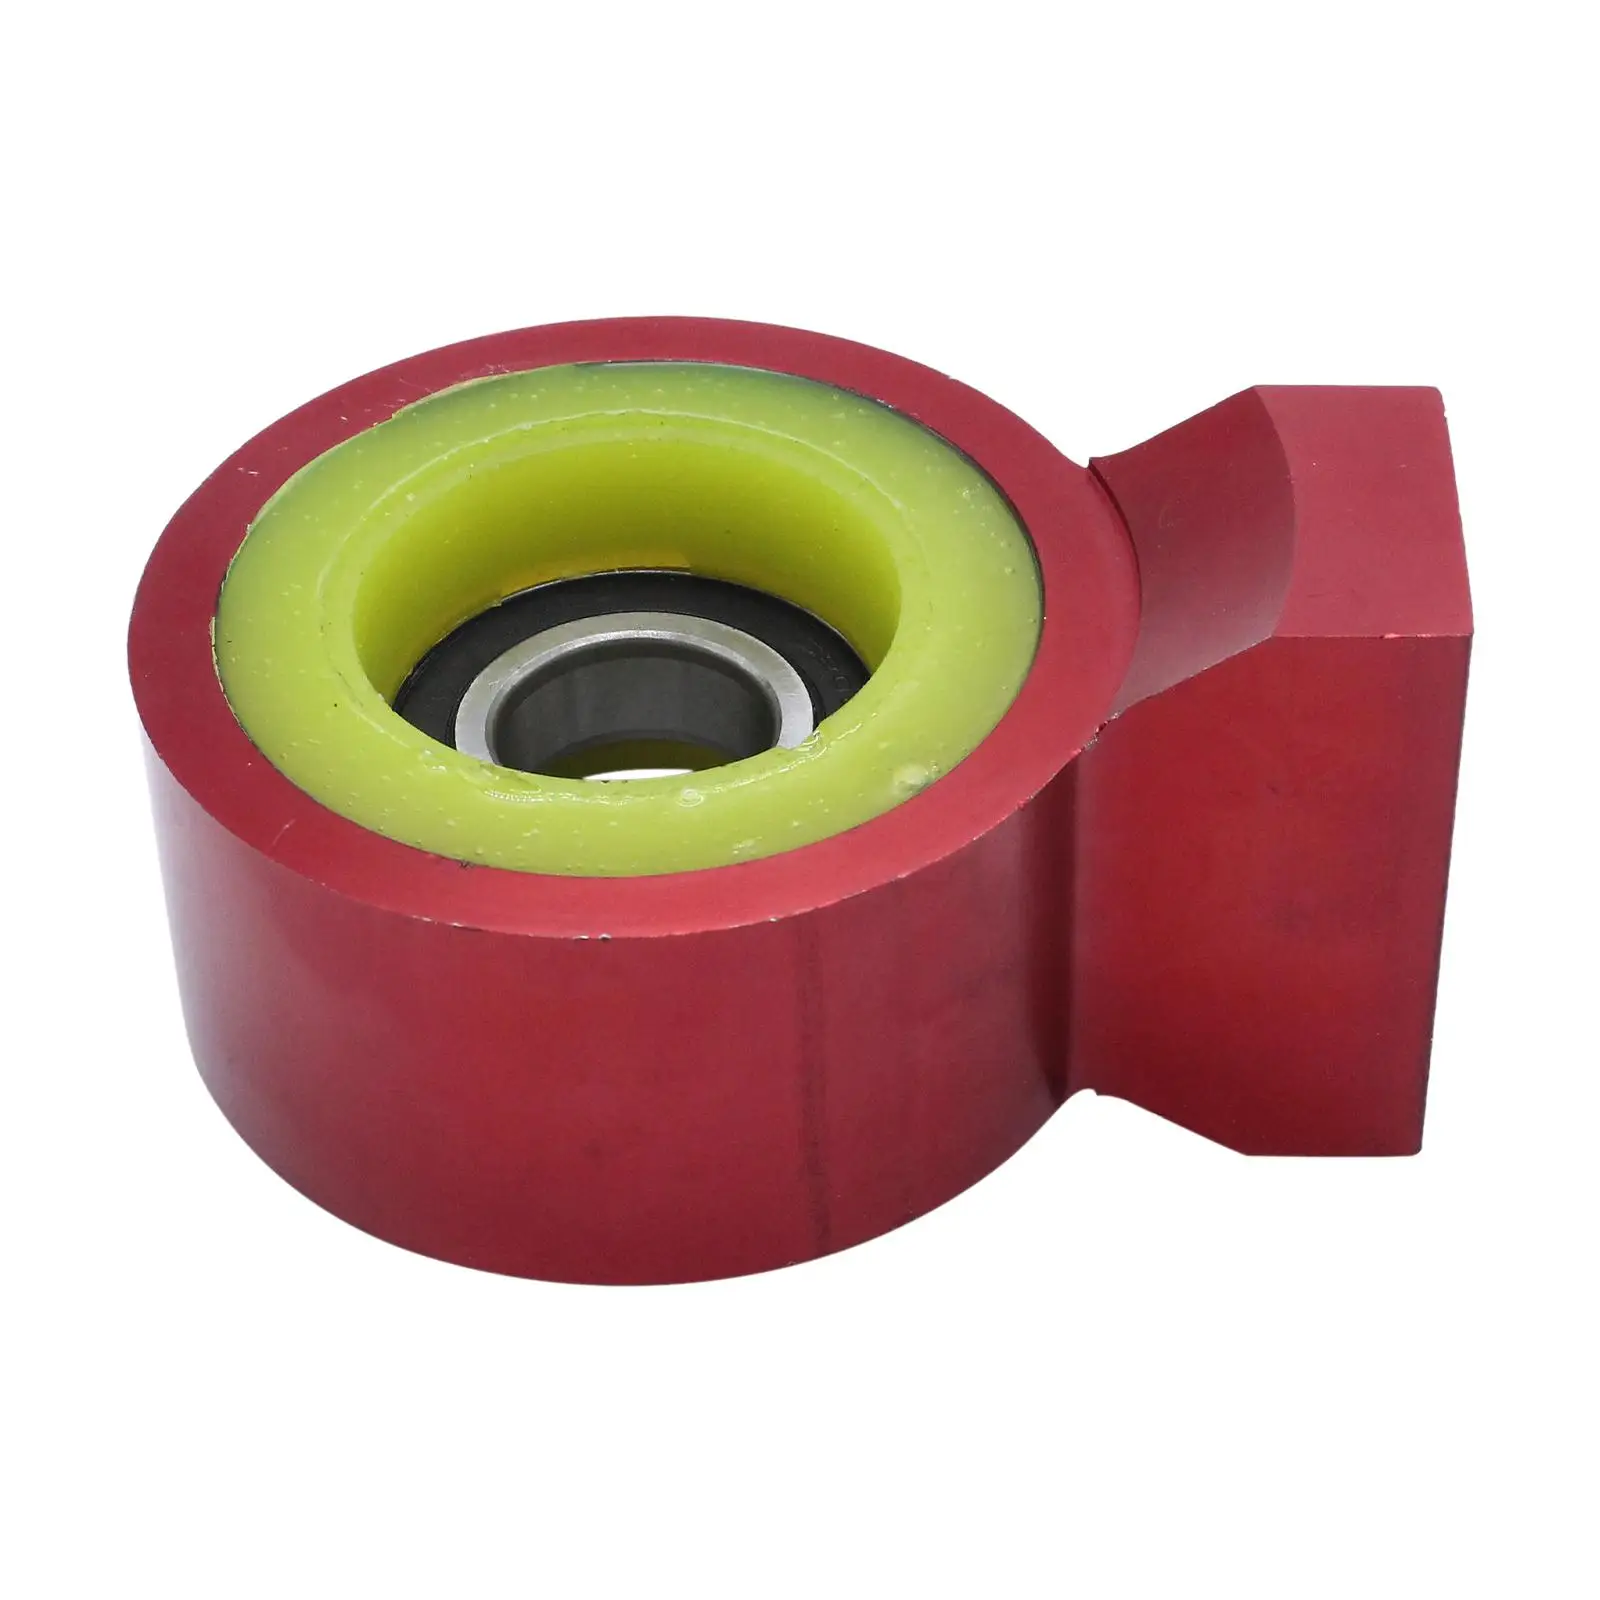 Automotive Poly Driveshaft Carrier Bearing Accessories Heavy Duty Red Metal for Chevy Impala 1958-1964